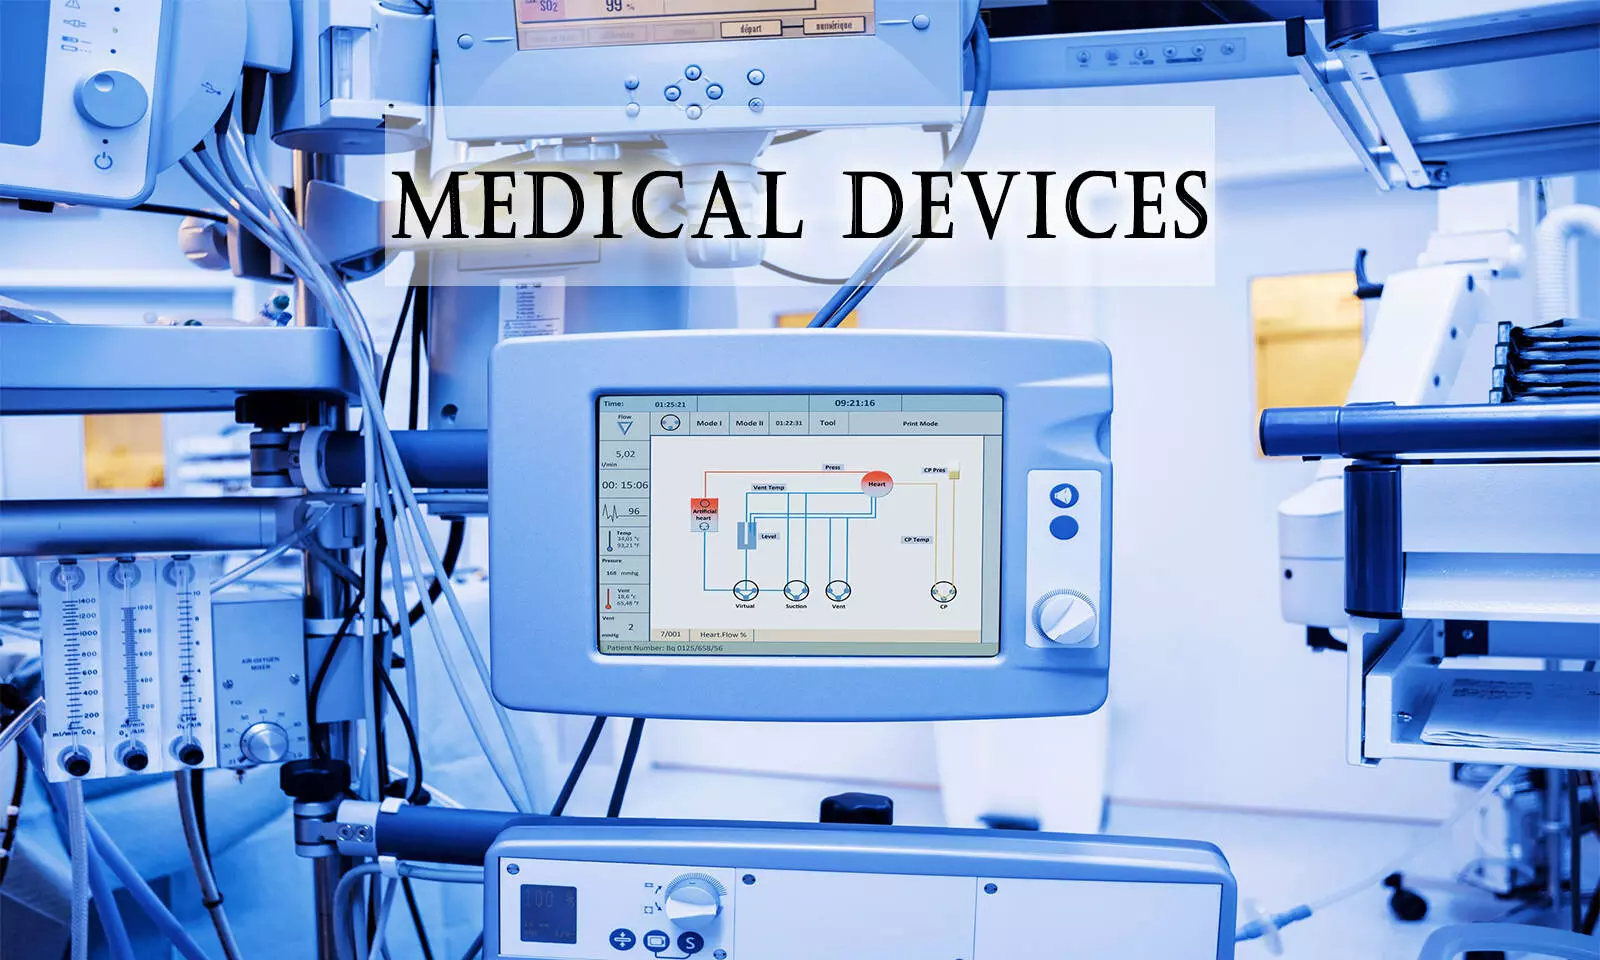 Parliamentary Panel recommends separate legislation, National Commission On Medical Devices